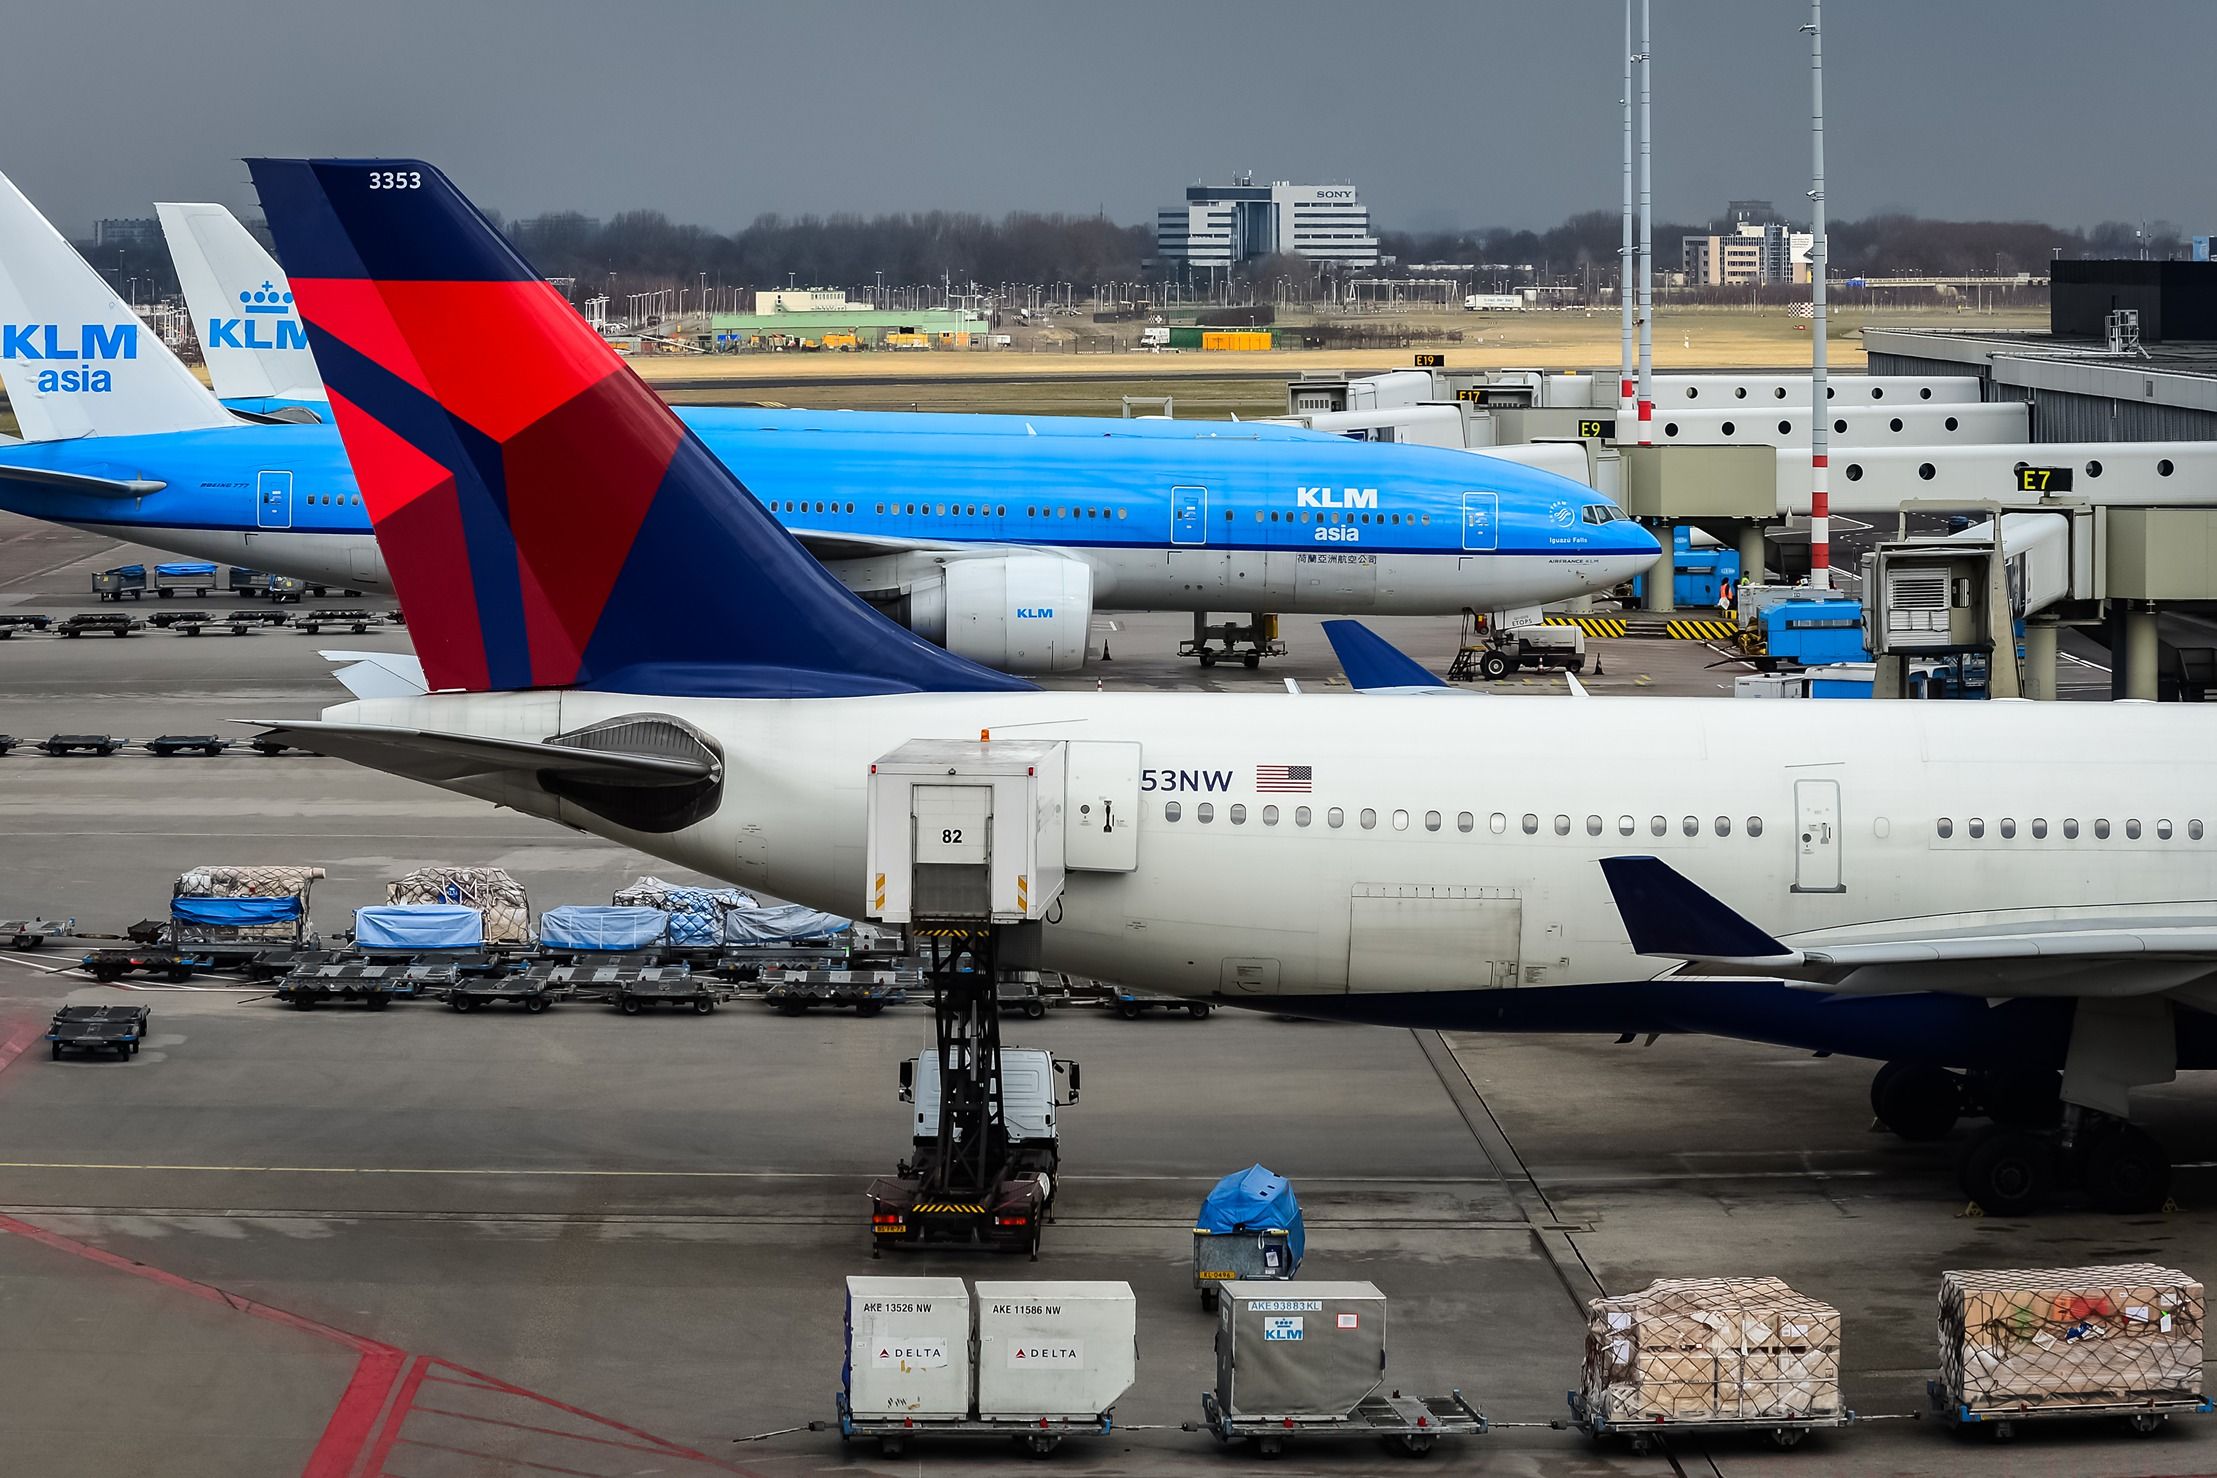 KLM and Delta Air Lines aircraft at Amsterdam Schiphol Airport AMS shutterstock_1542390362